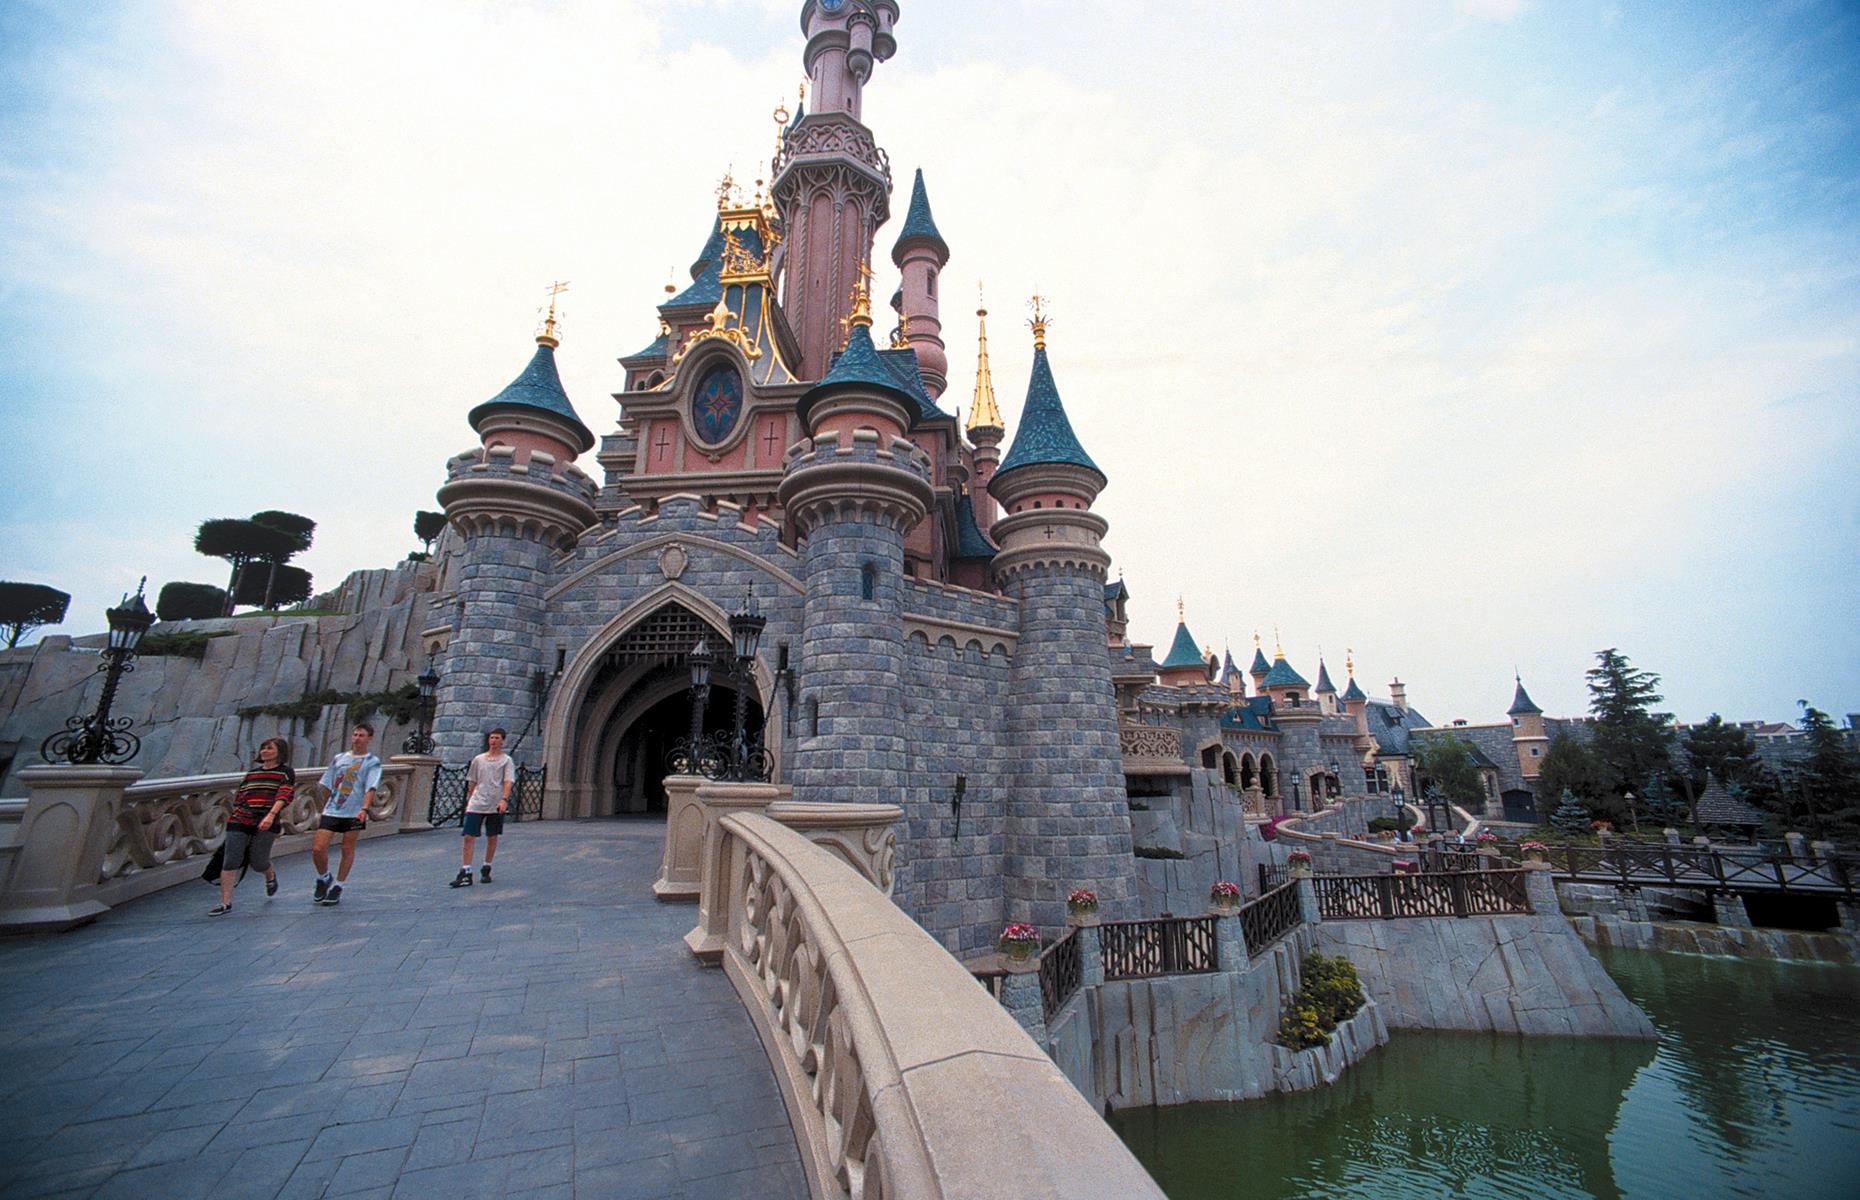 Disneyland Paris went from strength to strength in the Nineties and Noughties and, by 2001, the park had welcomed a whopping 100 million visitors. The landmark Sleeping Beauty Castle (or Le Château de la Belle au Bois Dormant) is pictured here that same year: its pointed turrets, glittering moat and pastel-pink façade love the camera.